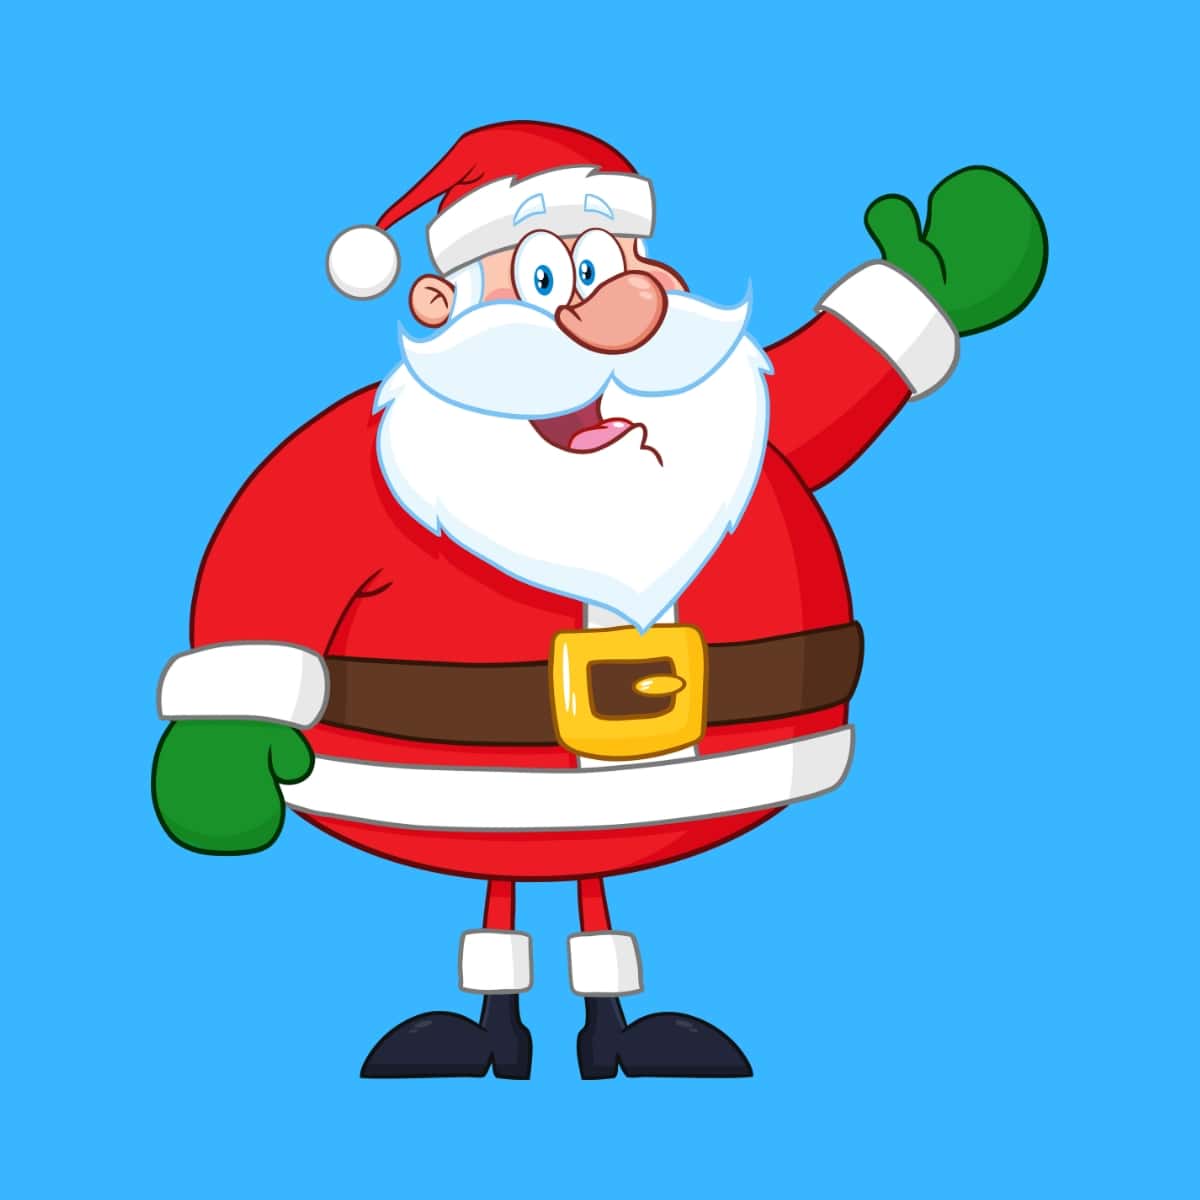 Cartoon graphic of Santa waving with green gloves on a blue background.